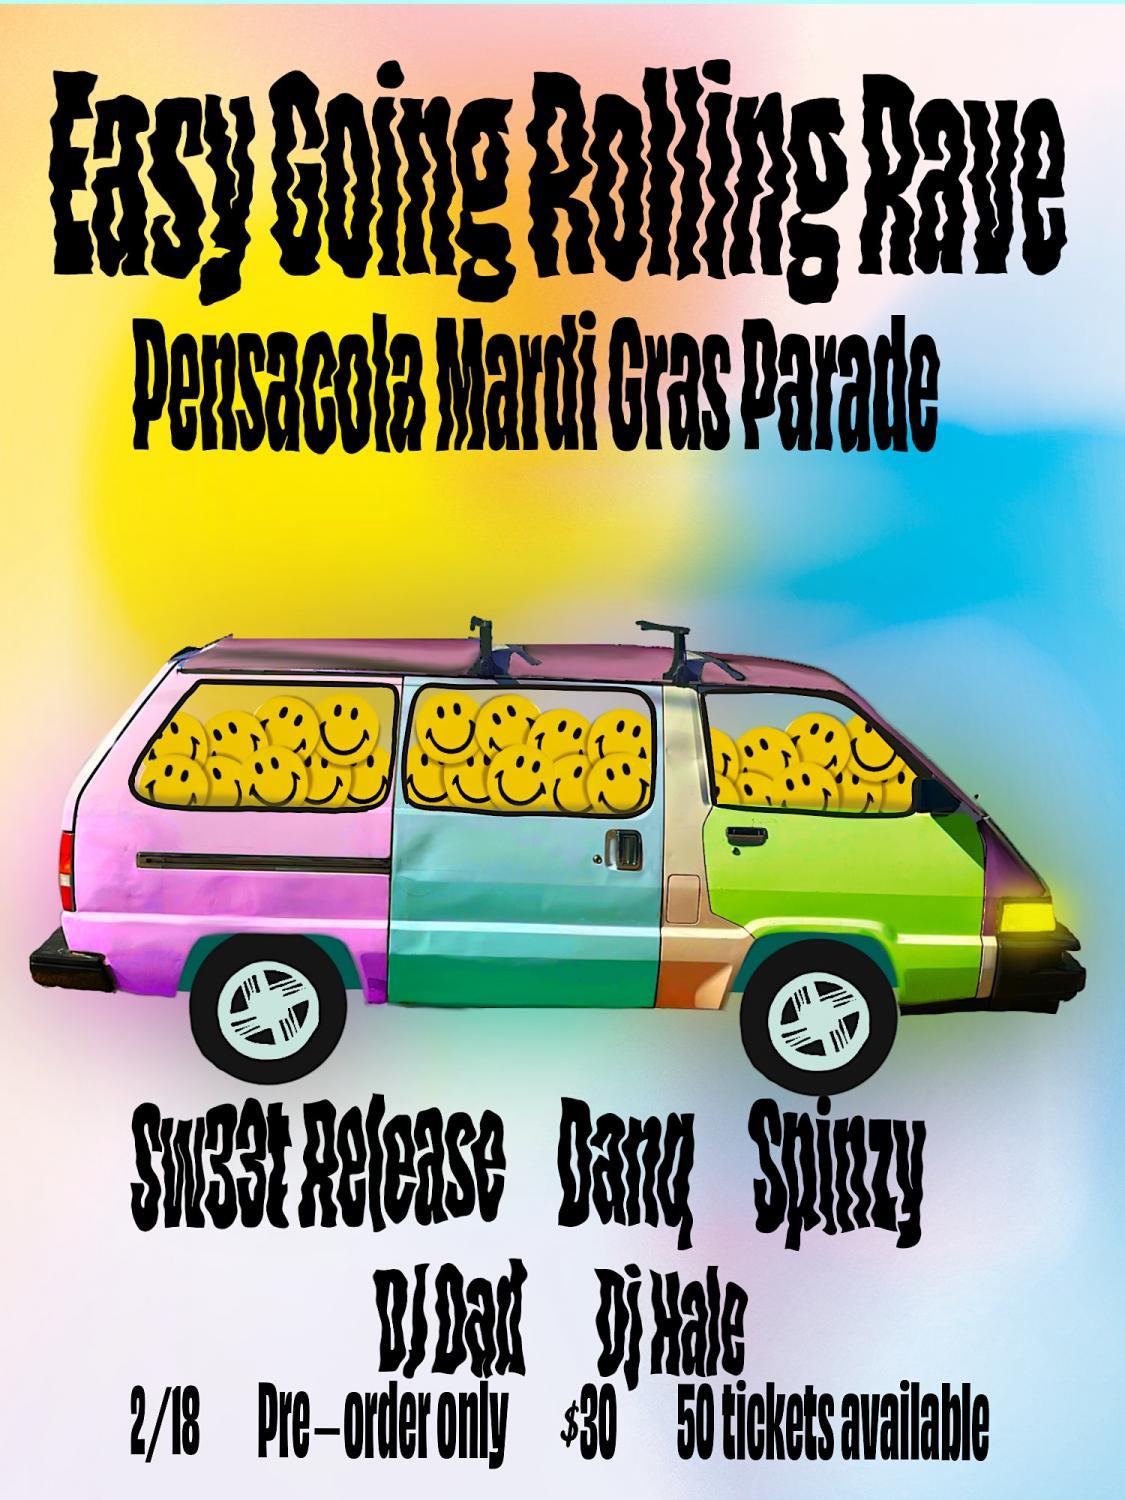 Easy Going Rolling Rave at South Palafox Street